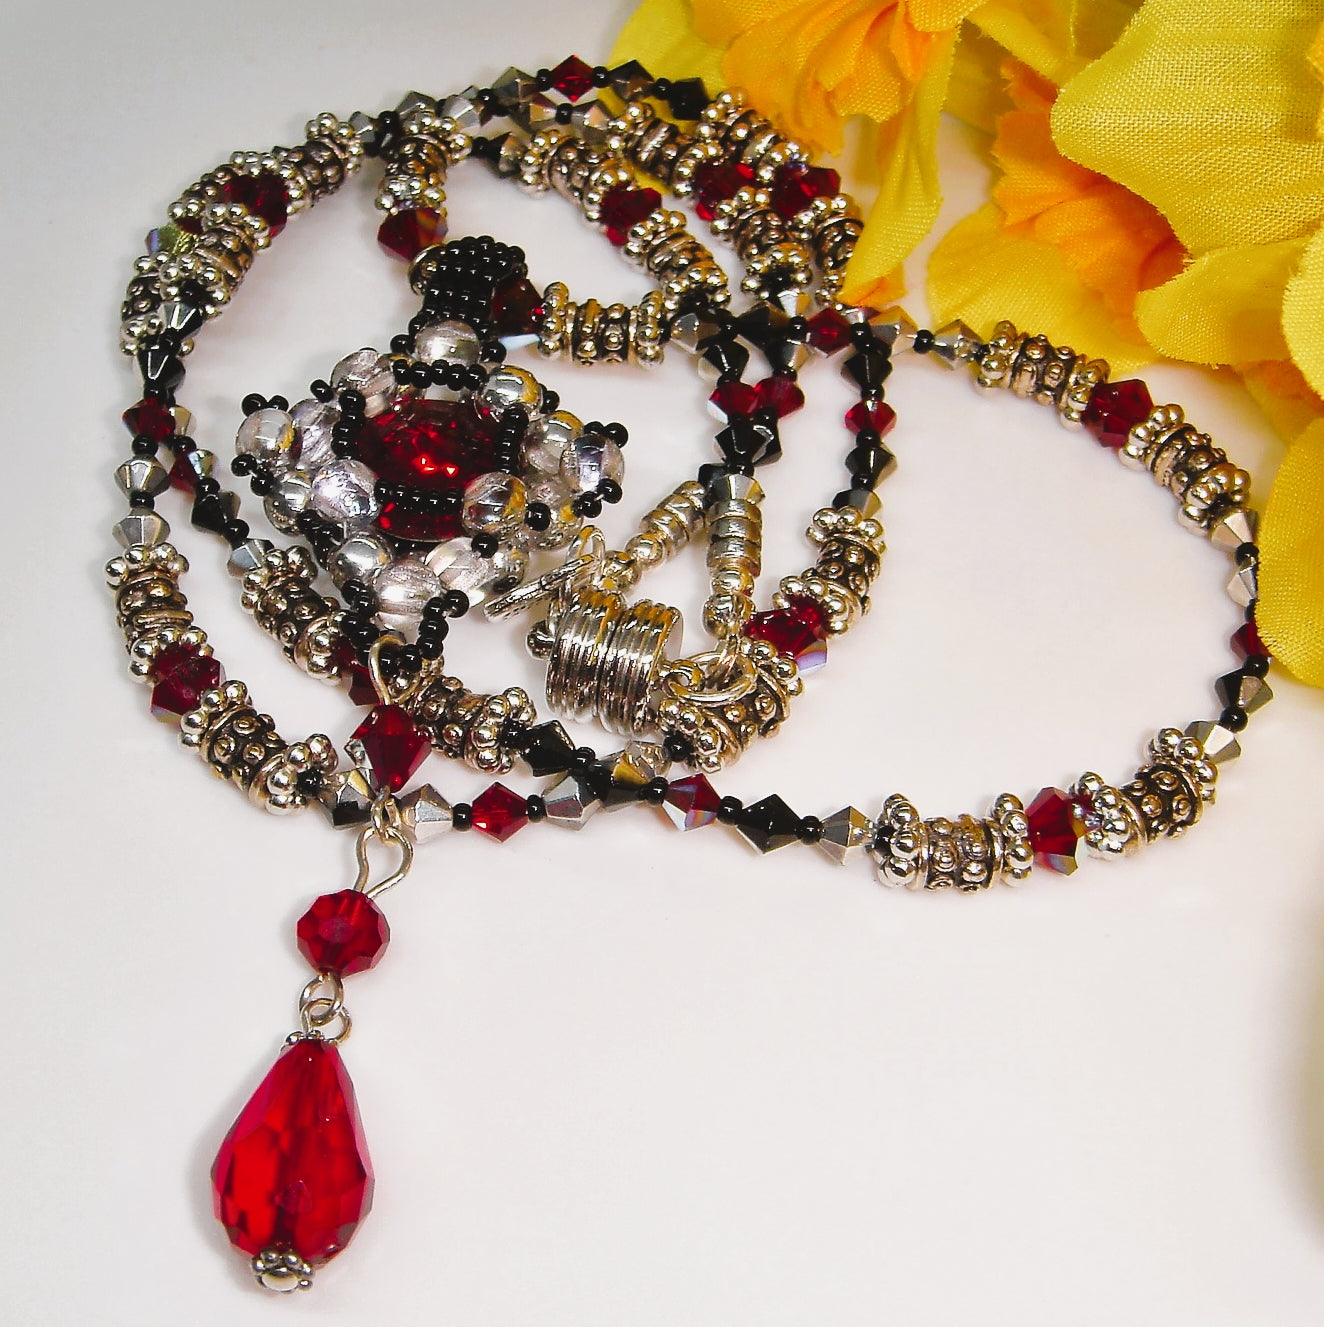 Black and Red Gothic Beaded Necklace and Pendant